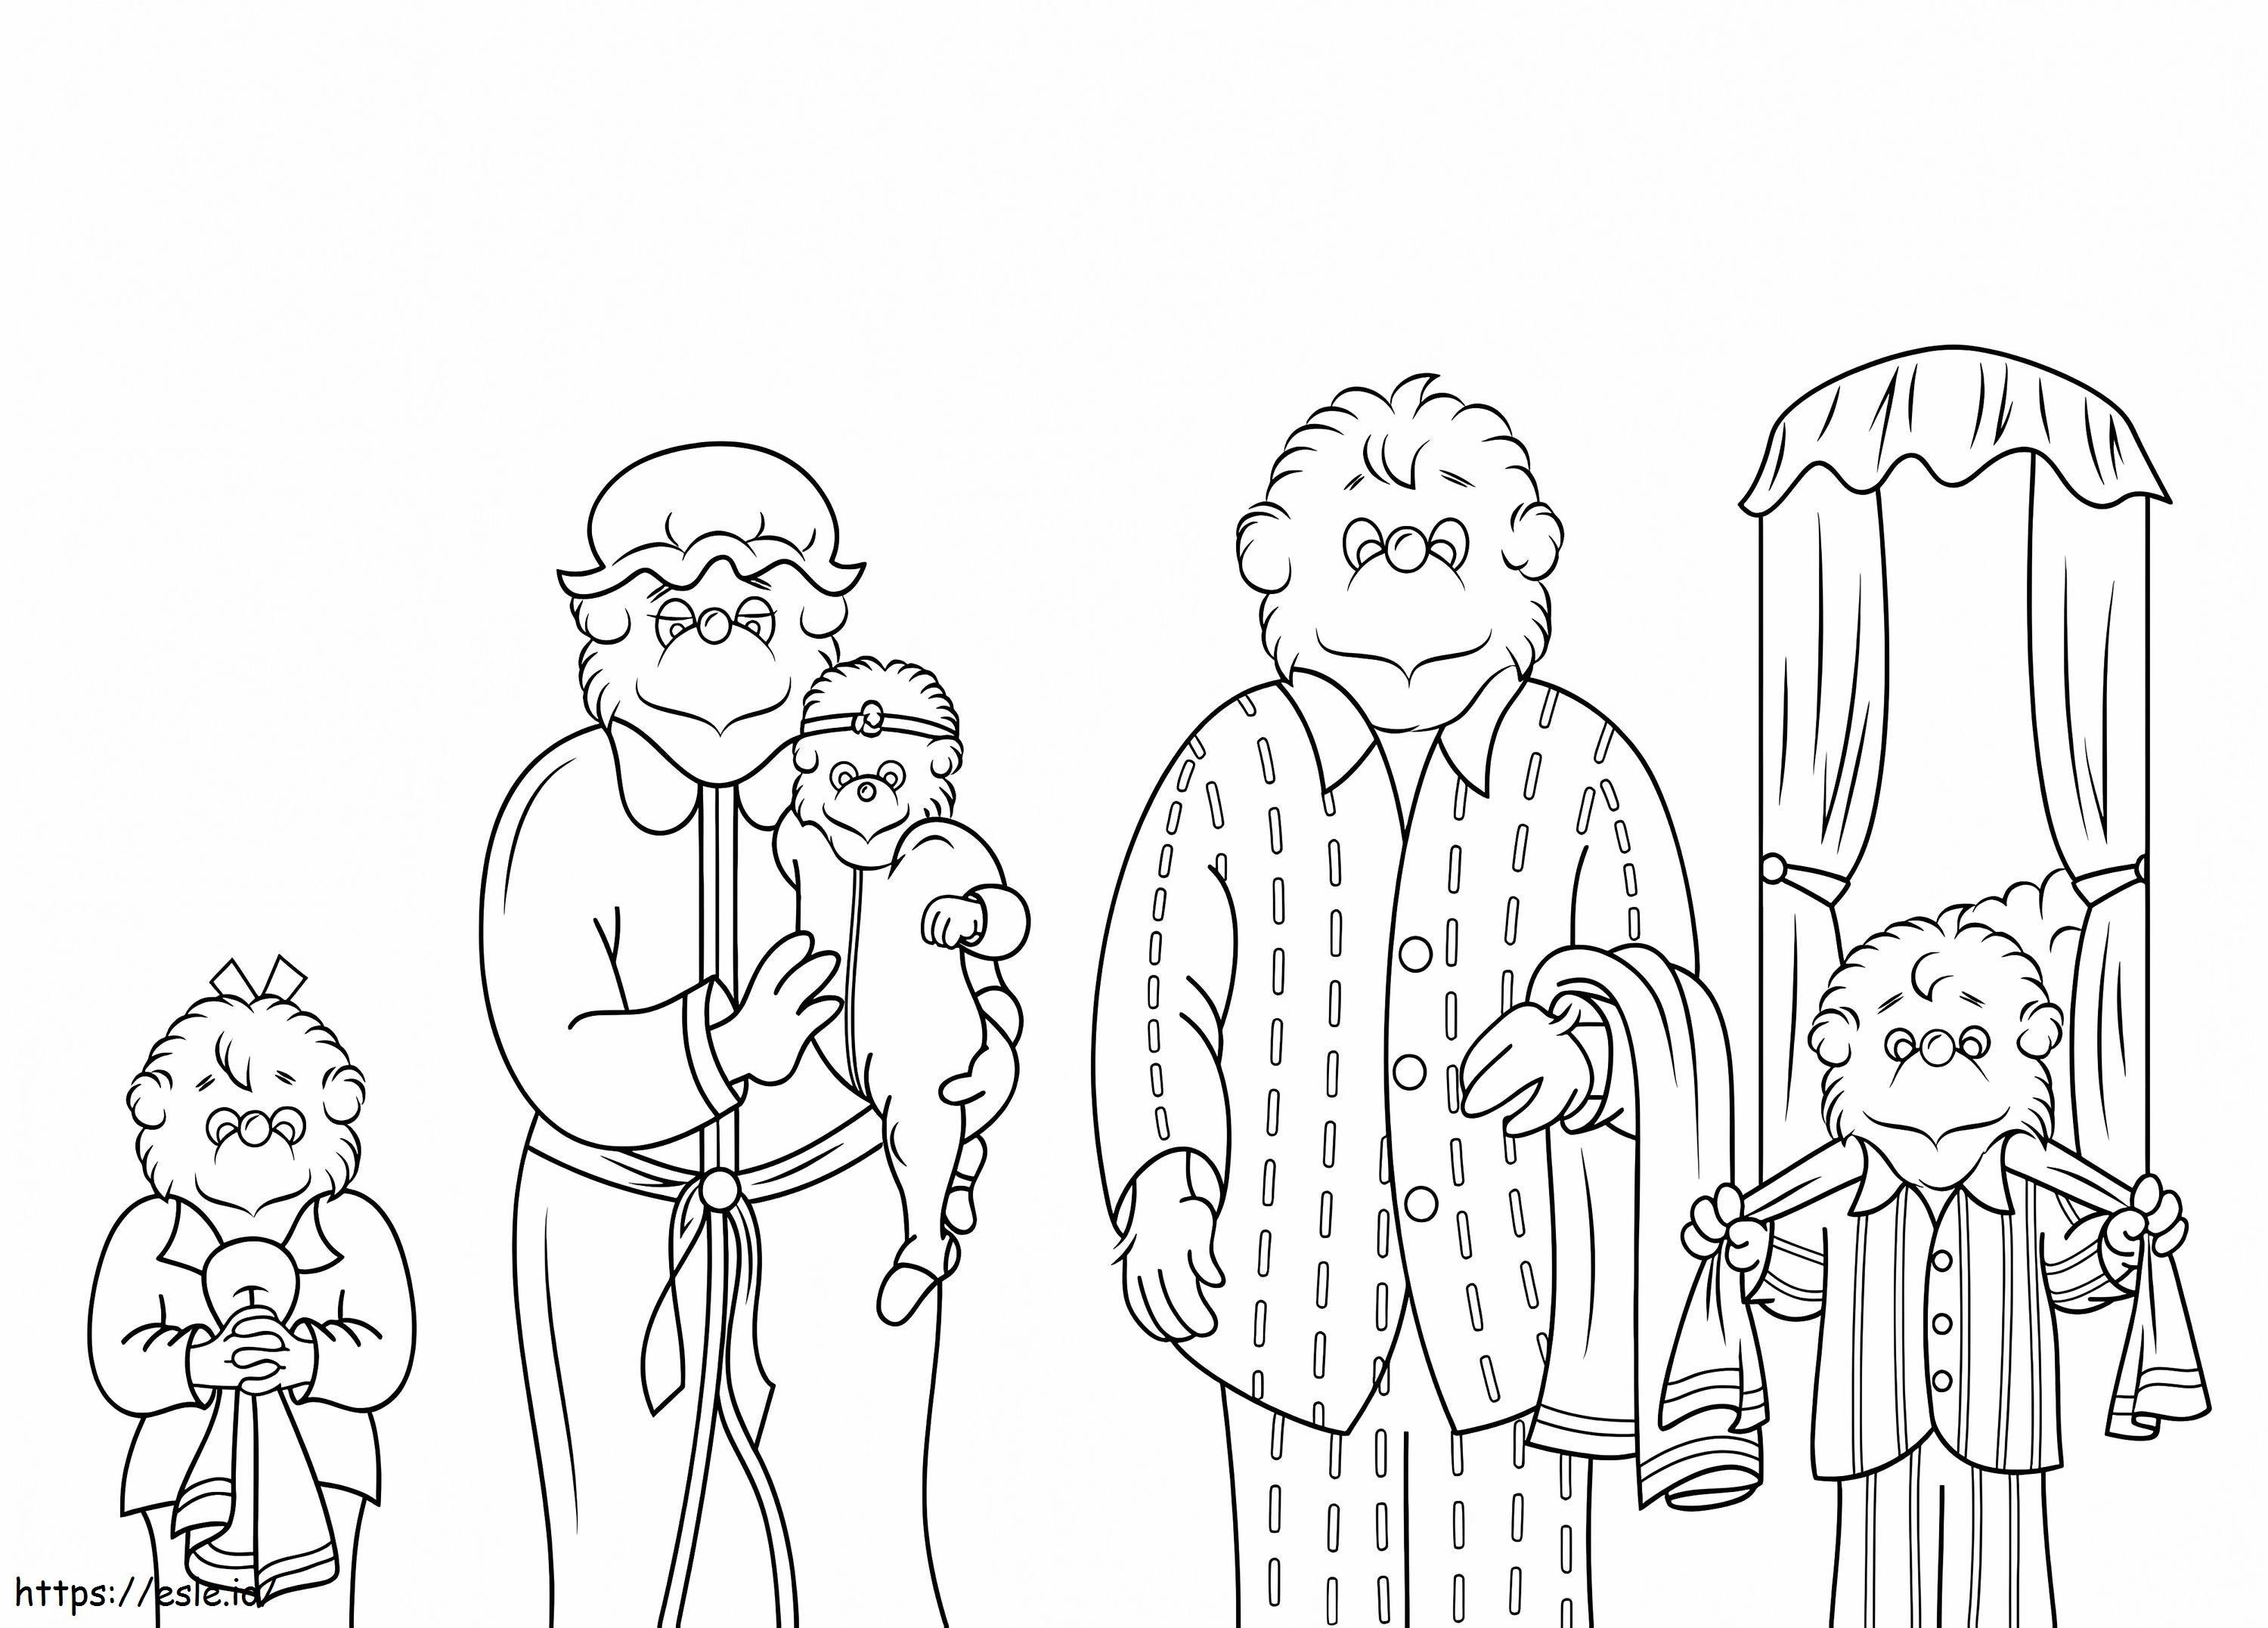 Berenstain Bears coloring page